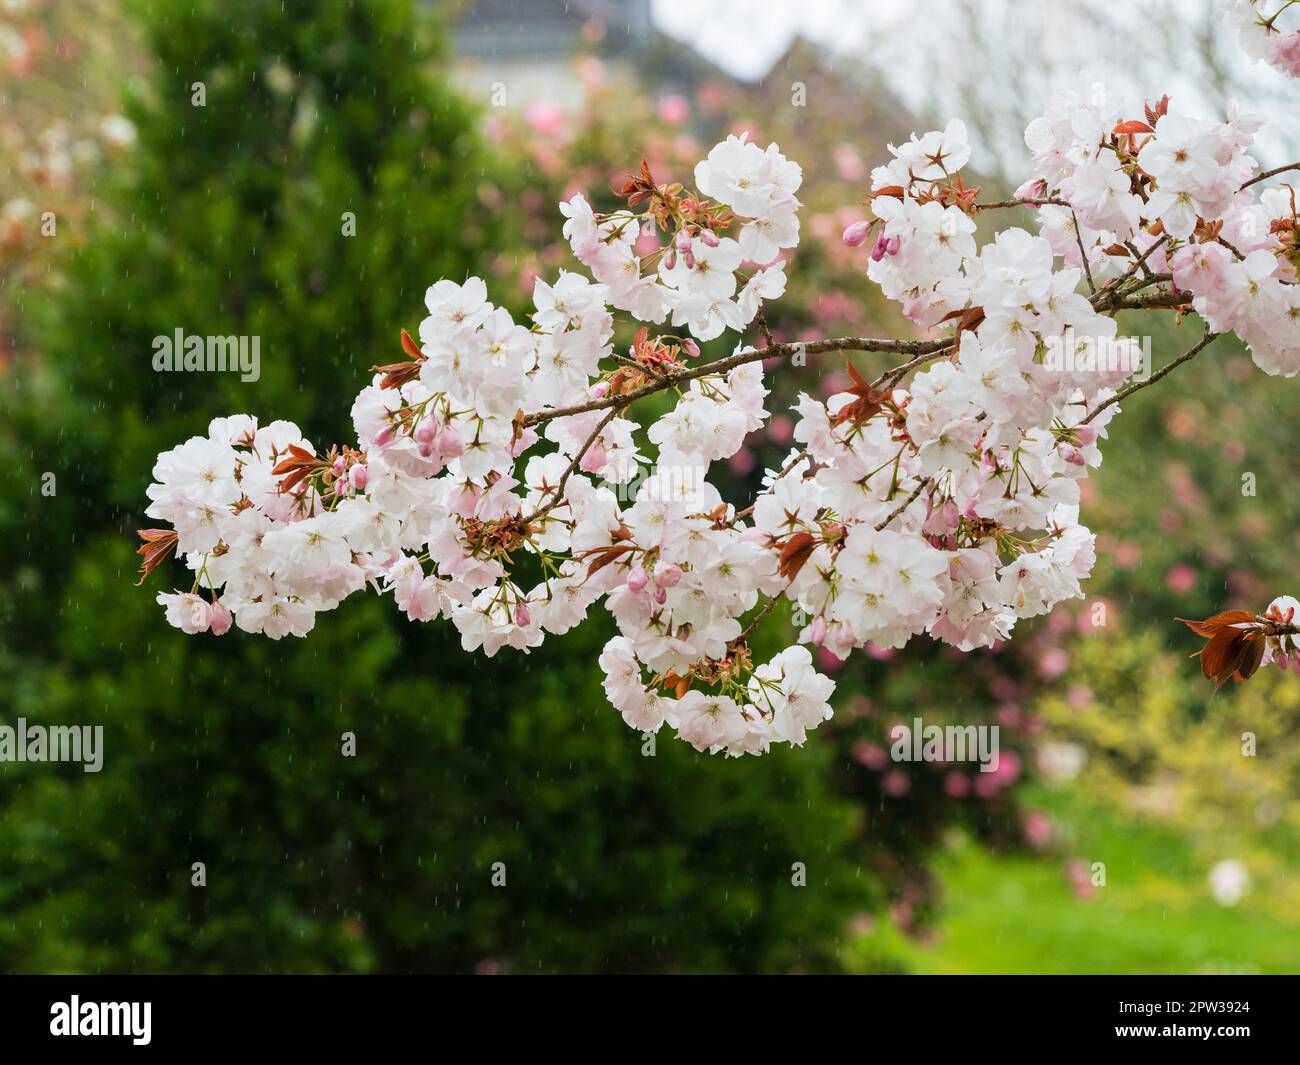 White spring blossom of the ornamental spring flowering cherry, Prunus 'Accolade' with rain streaks from an April shower Stock Photo